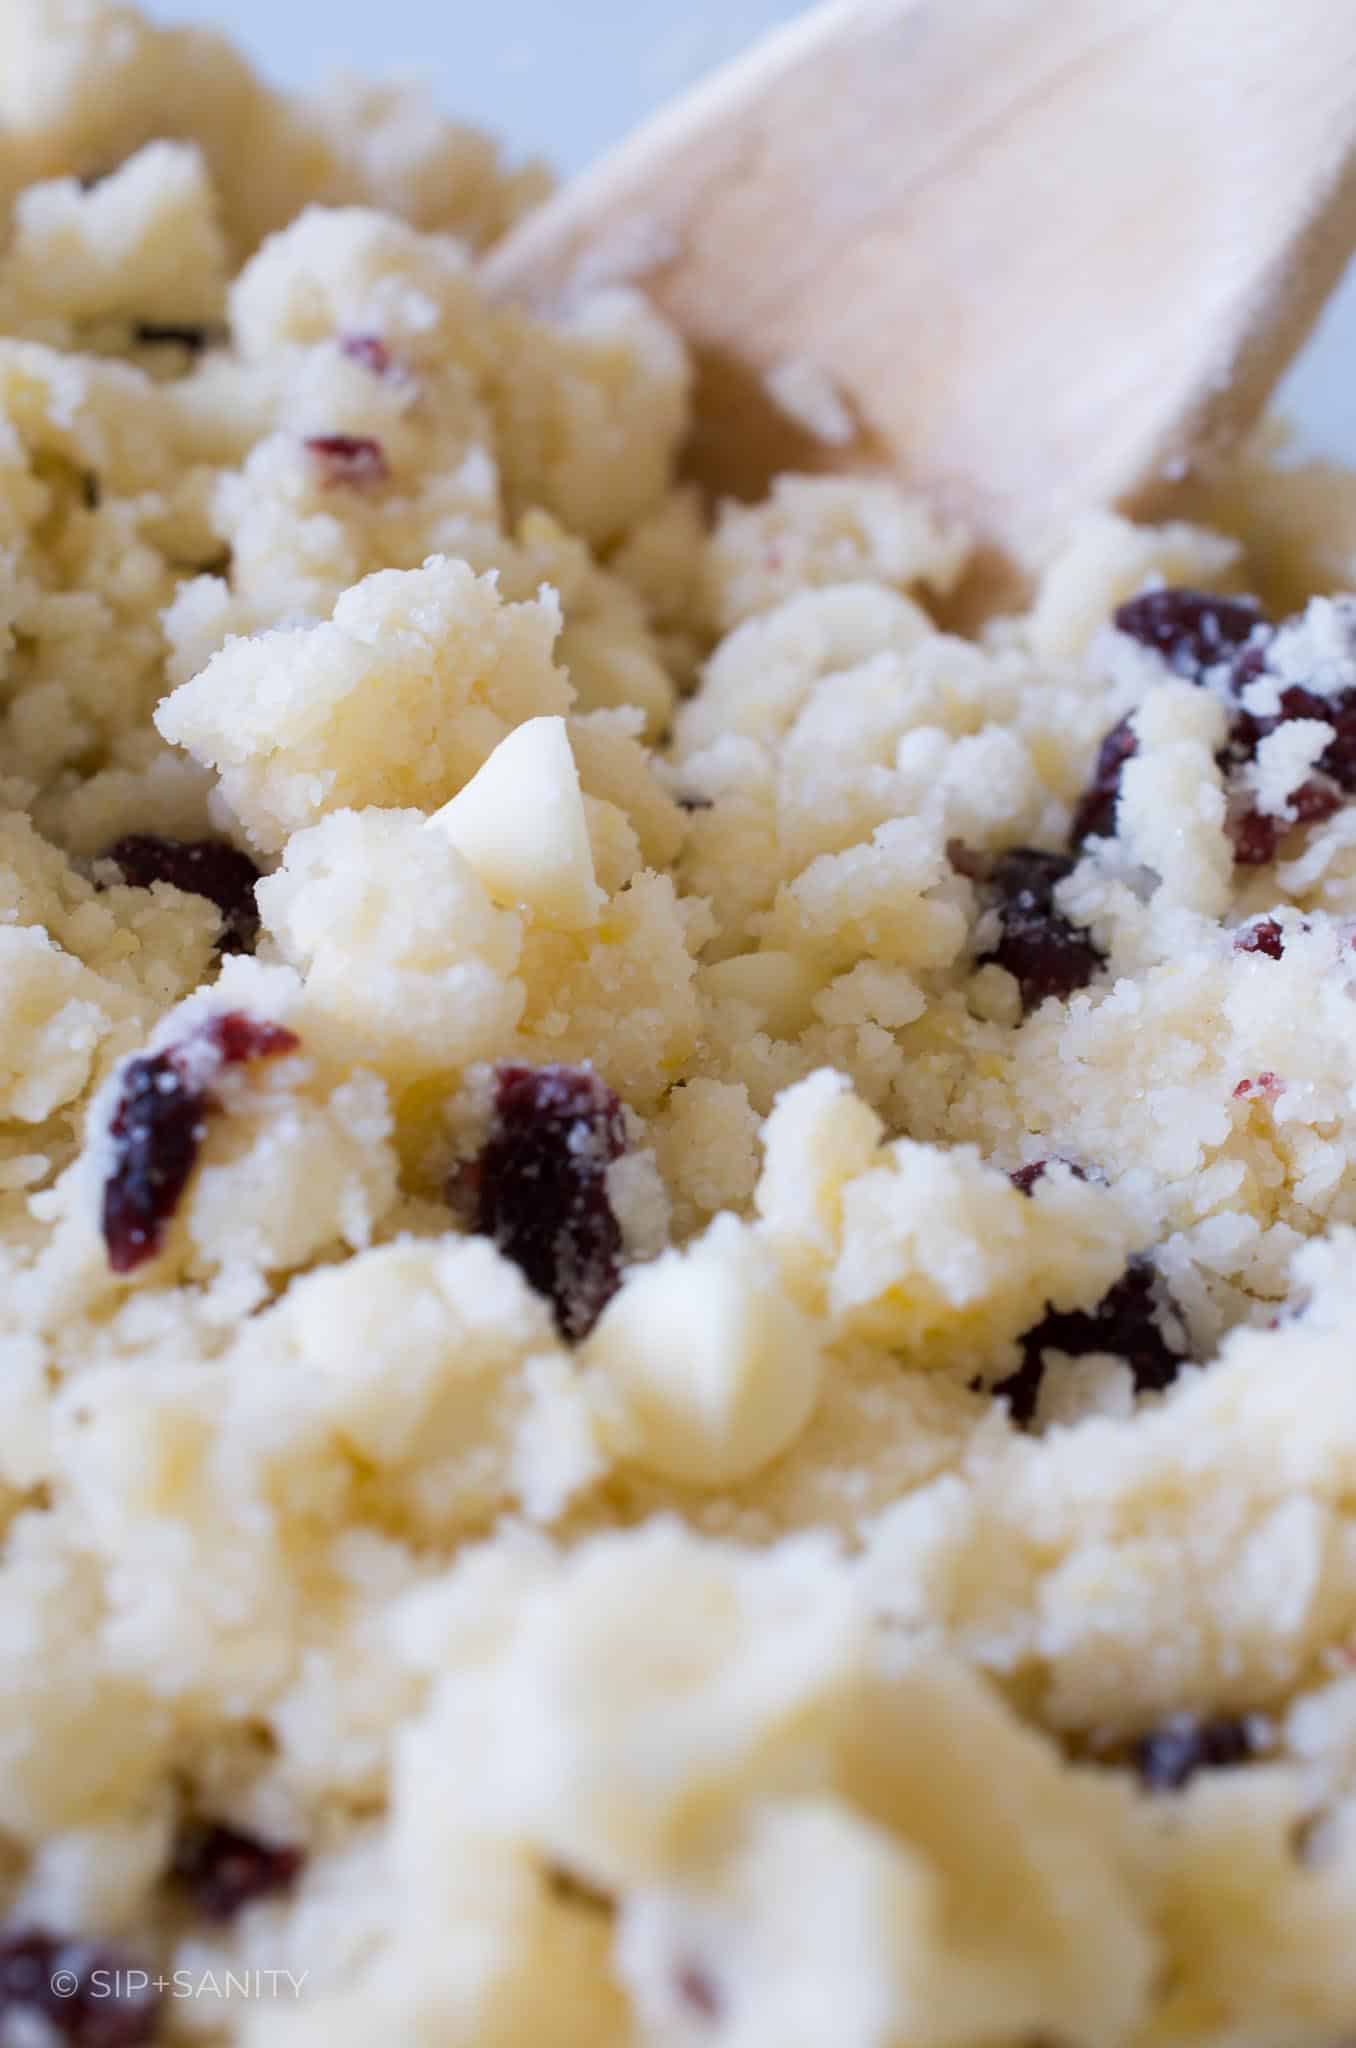 Sugar cookie dough with white chocolate chips and cranberry pieces mixed in.